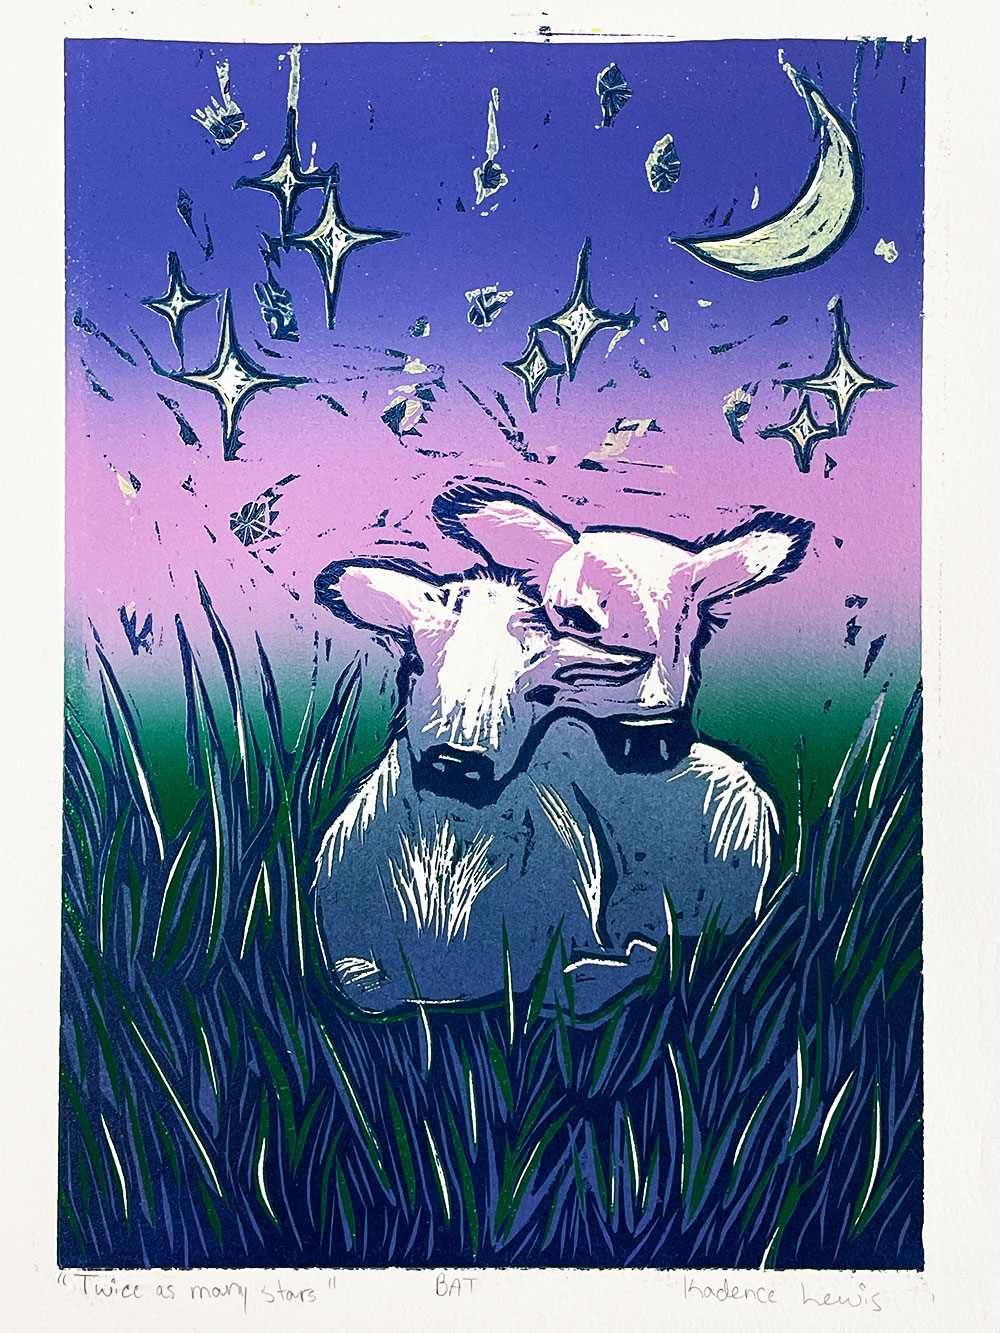 A printed image composed of two baby calves standing in a meadow under the moon and stars- printed using shades of purples and greens. 